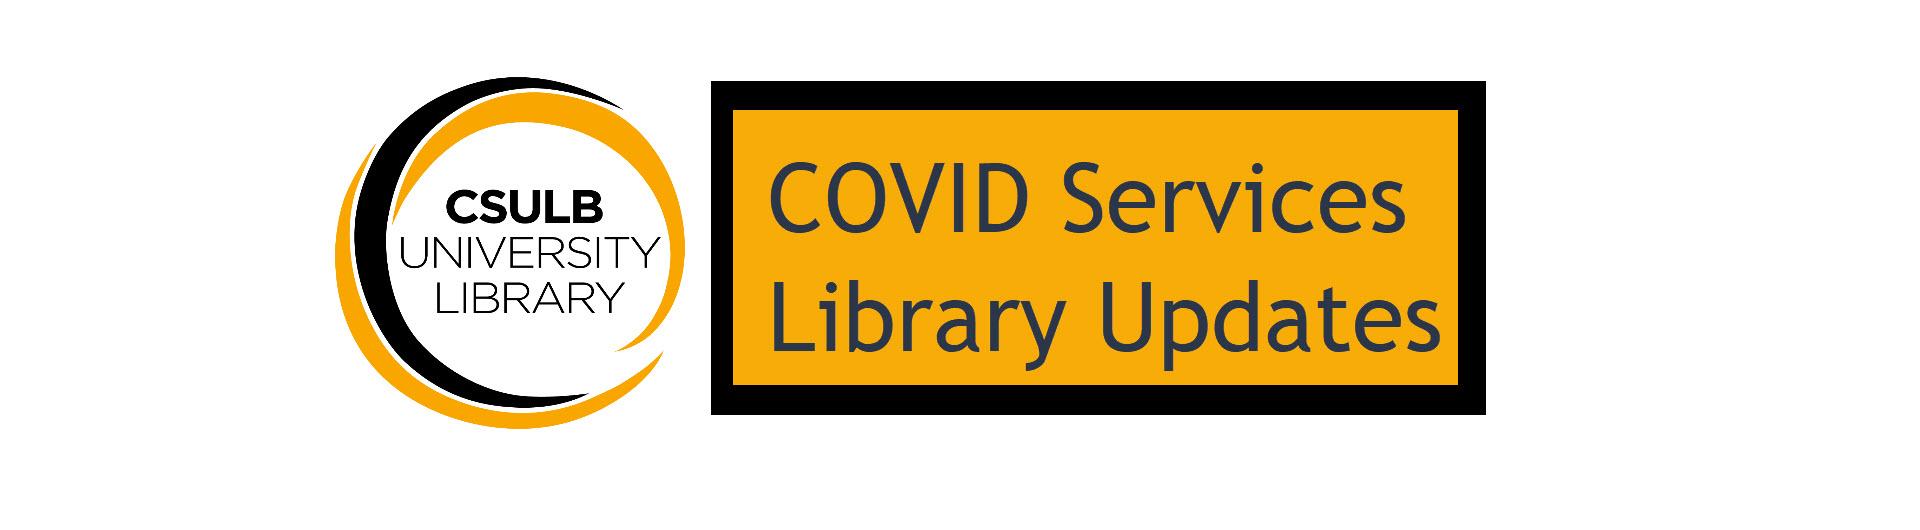 COVID Services Library Updates